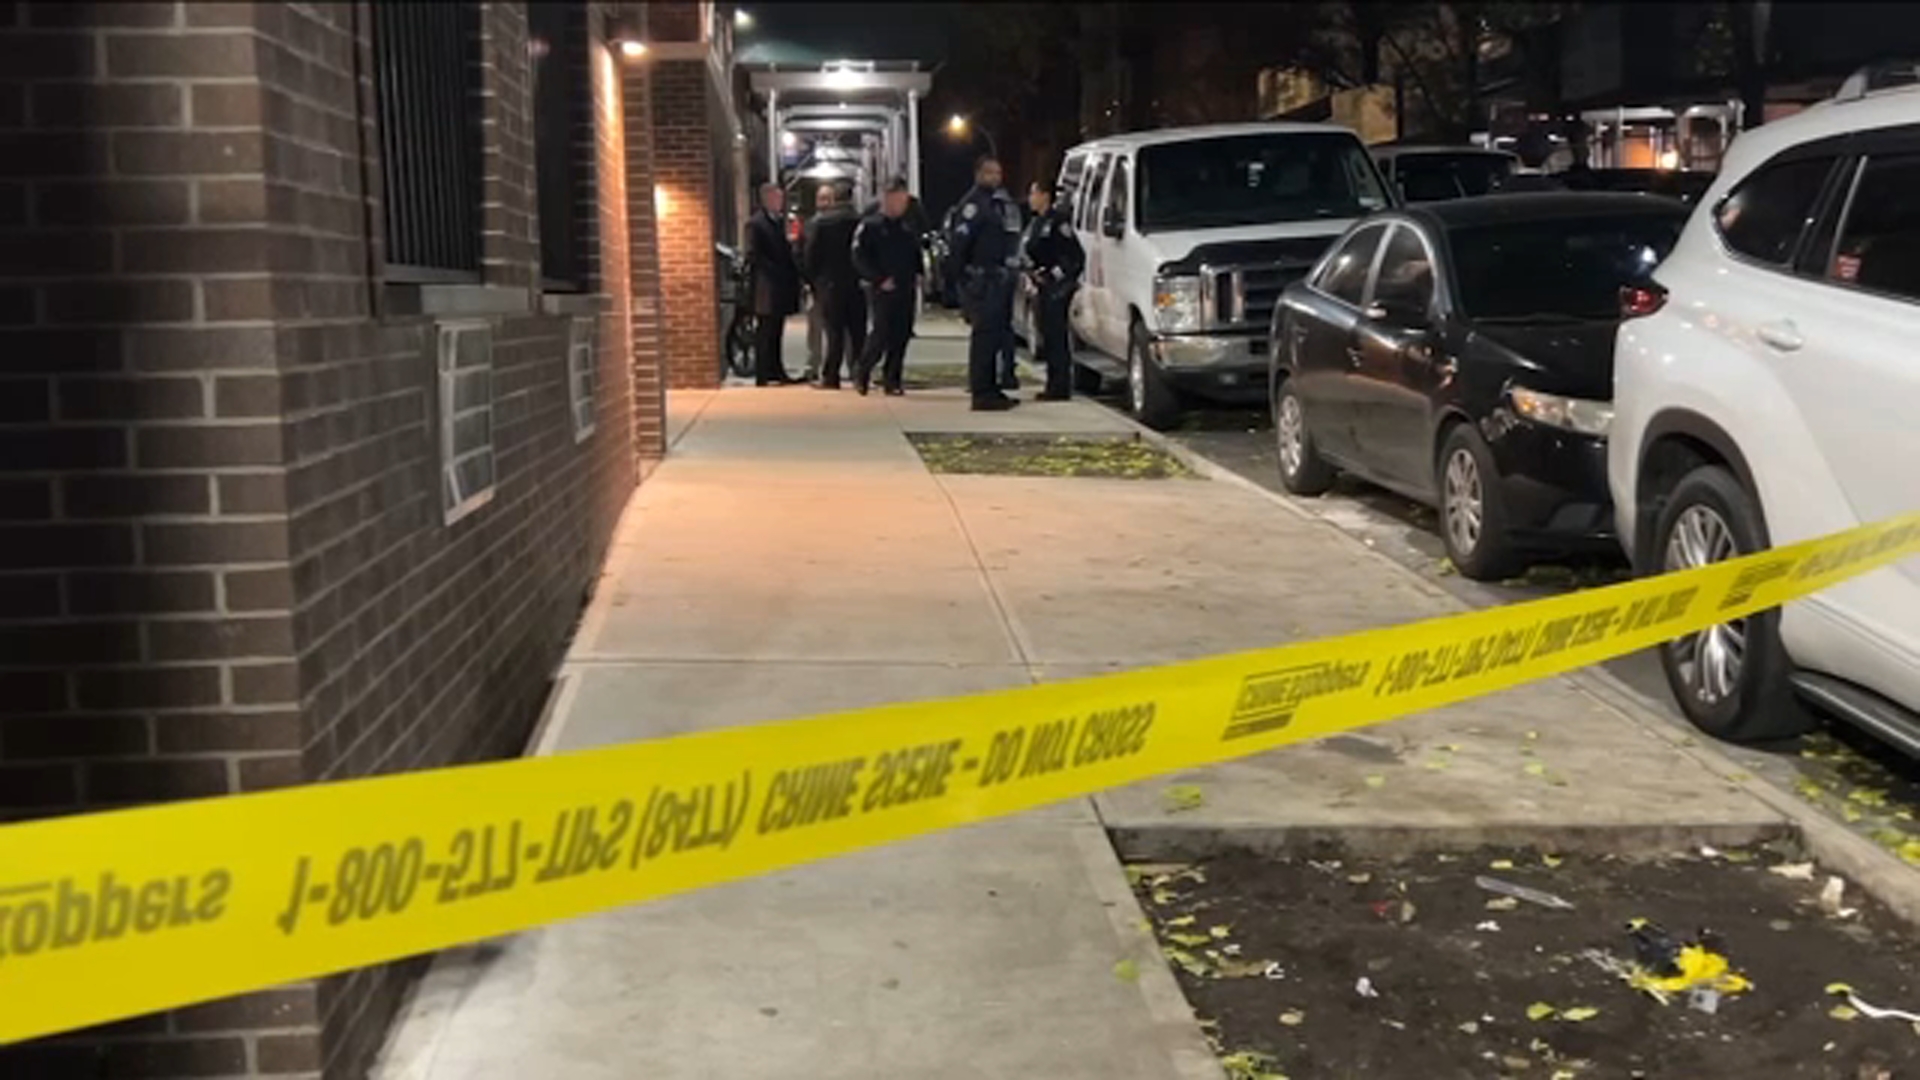 Two young boys killed in the Bronx; neighbors in shelter heard father screaming for help